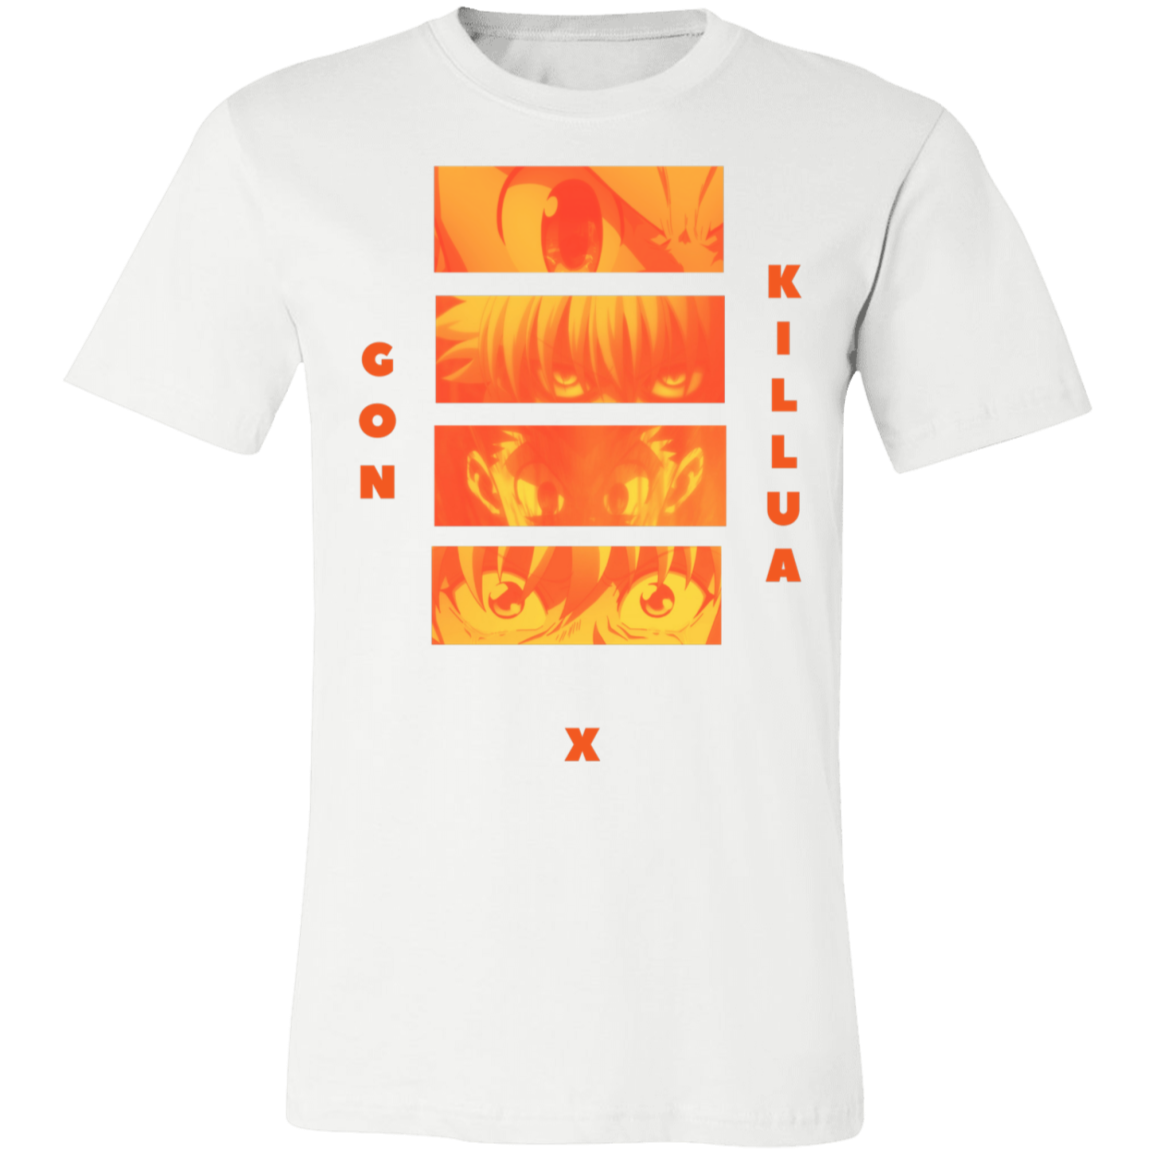 hunter x hunter tee in white, the left side reads "gon", the bottom reads "x", and the right side reads "killua" the lettering and design is orange